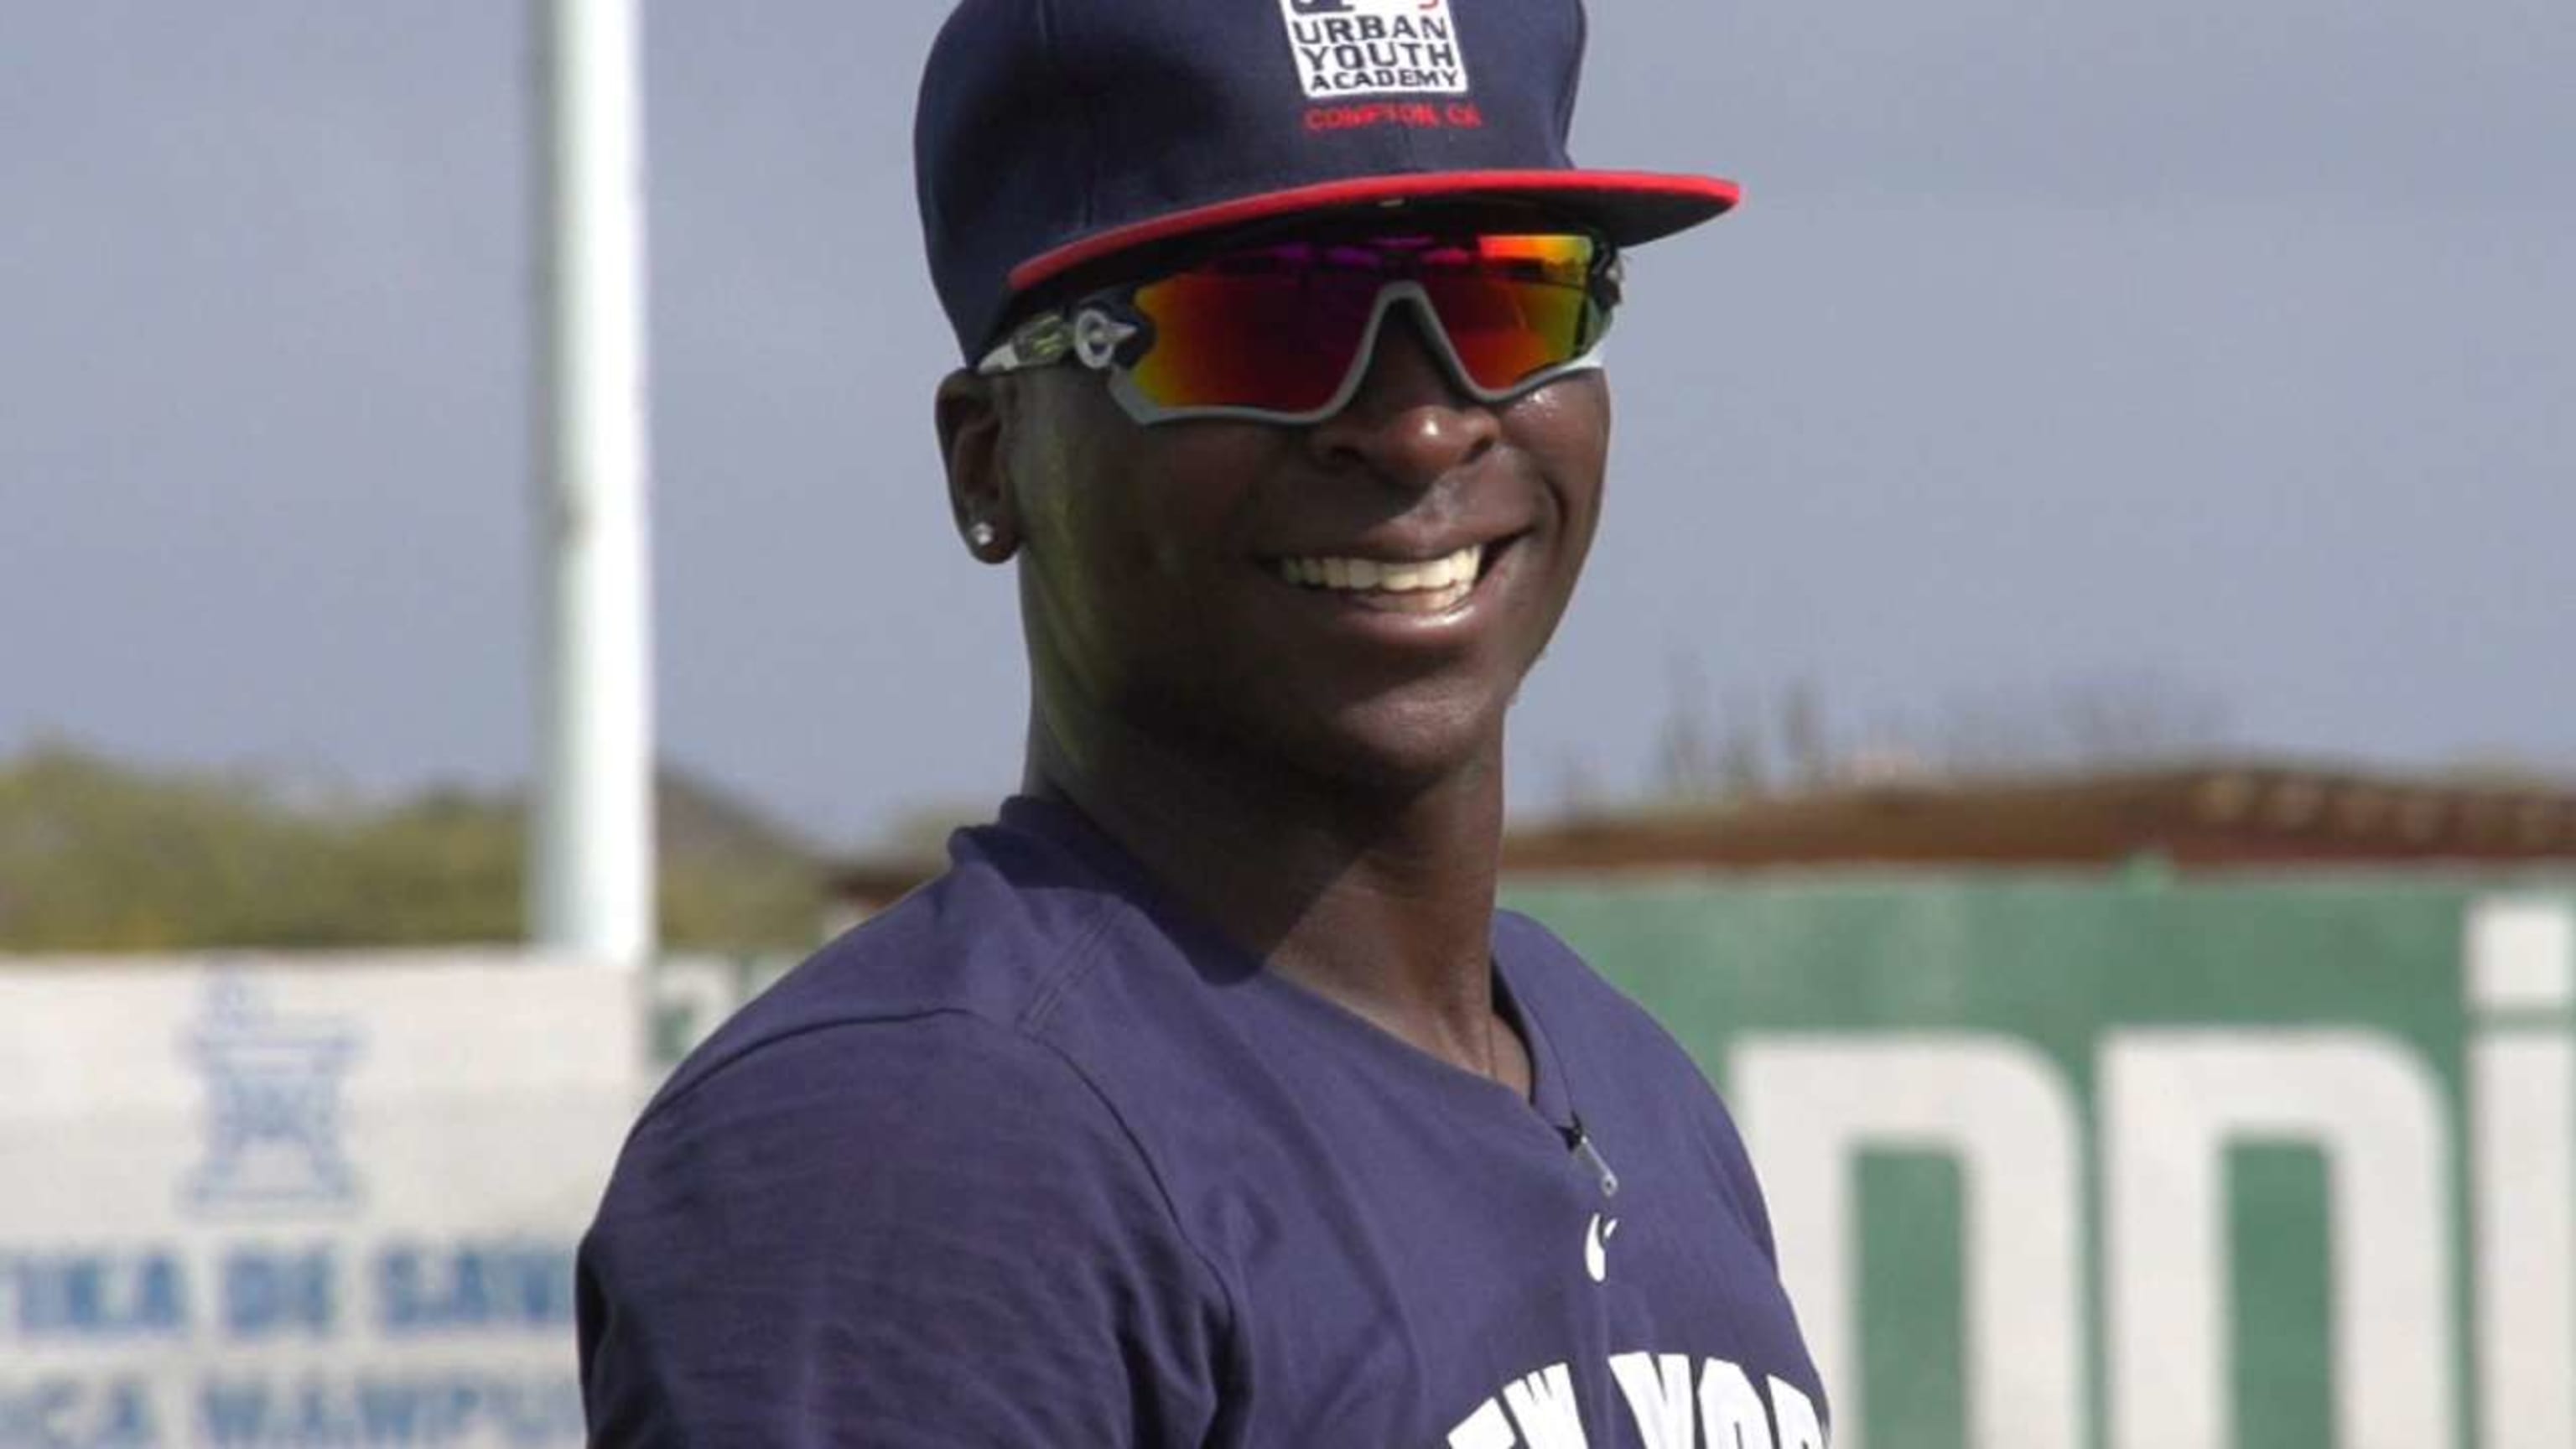 Didi Gregorius Not About to Give Up Job Easily — College Baseball